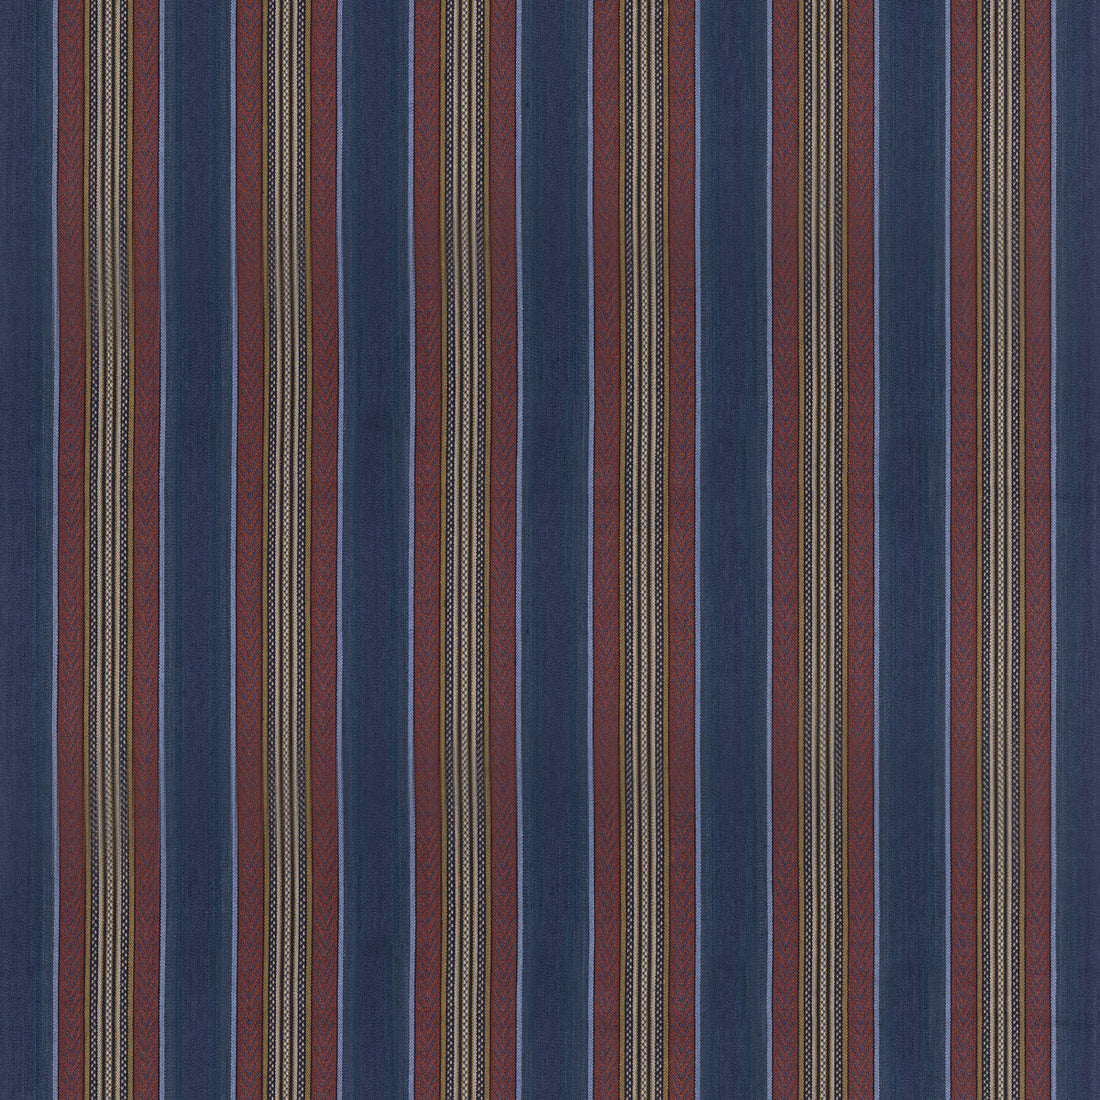 Westerly Stripe fabric in indigo/red color - pattern FD827.G103.0 - by Mulberry in the Westerly Stripes collection